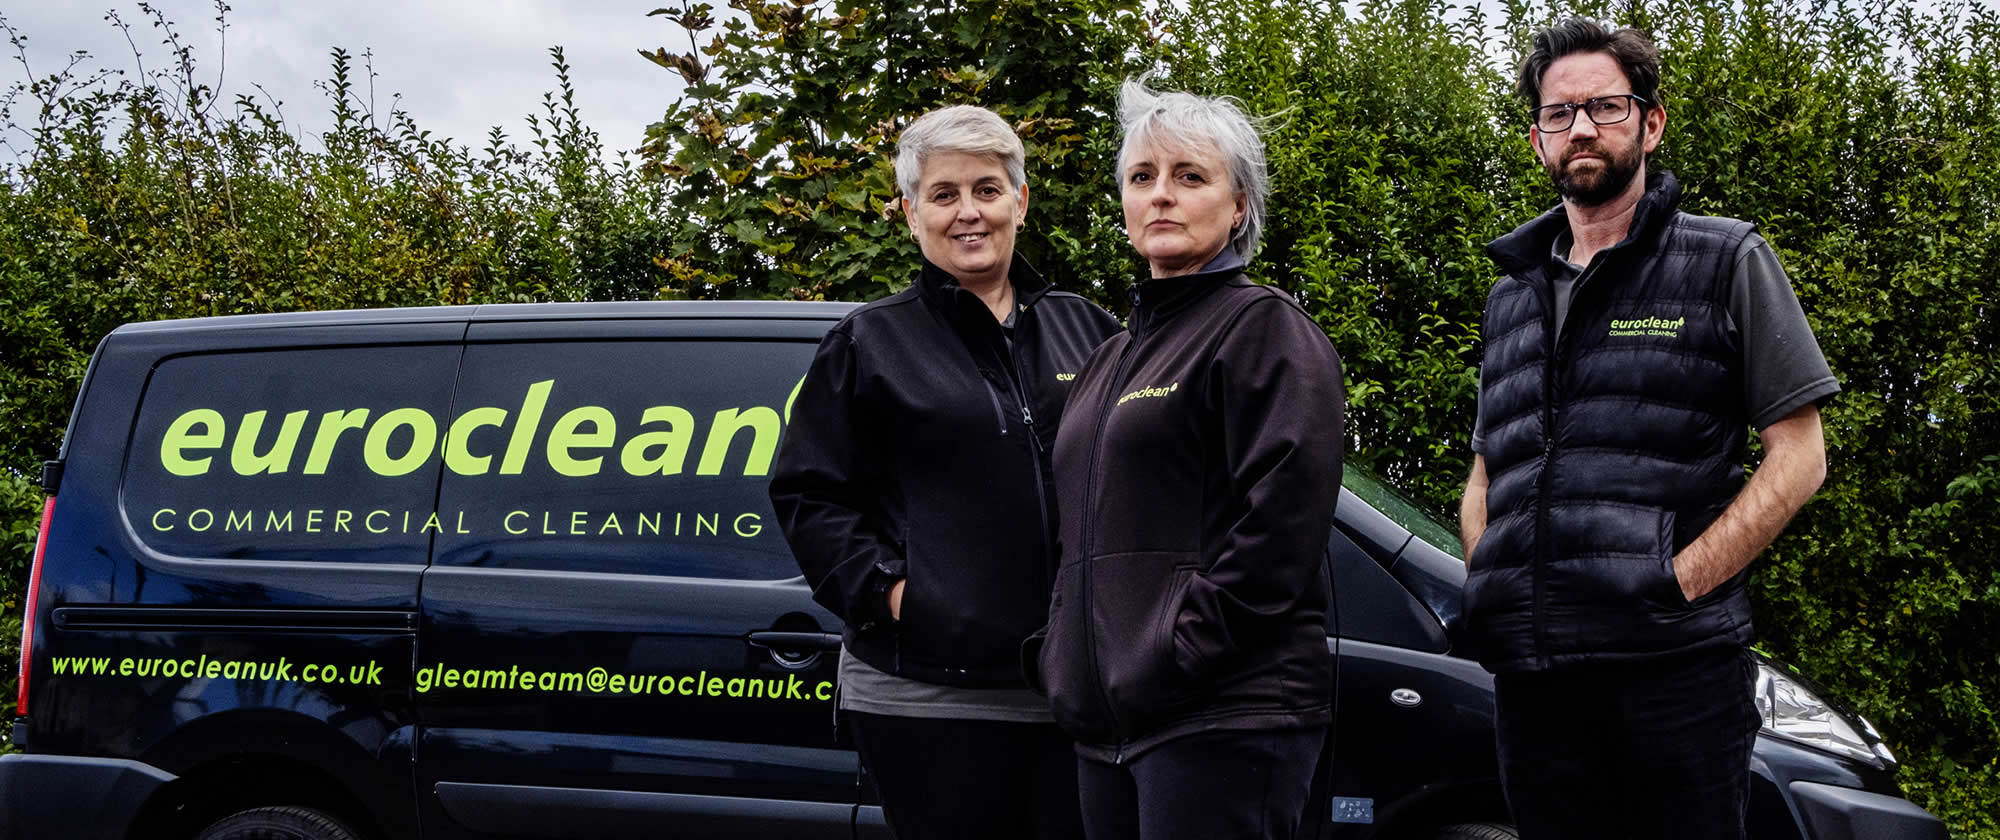 Euroclean Commercial Cleaning in Central Scotland